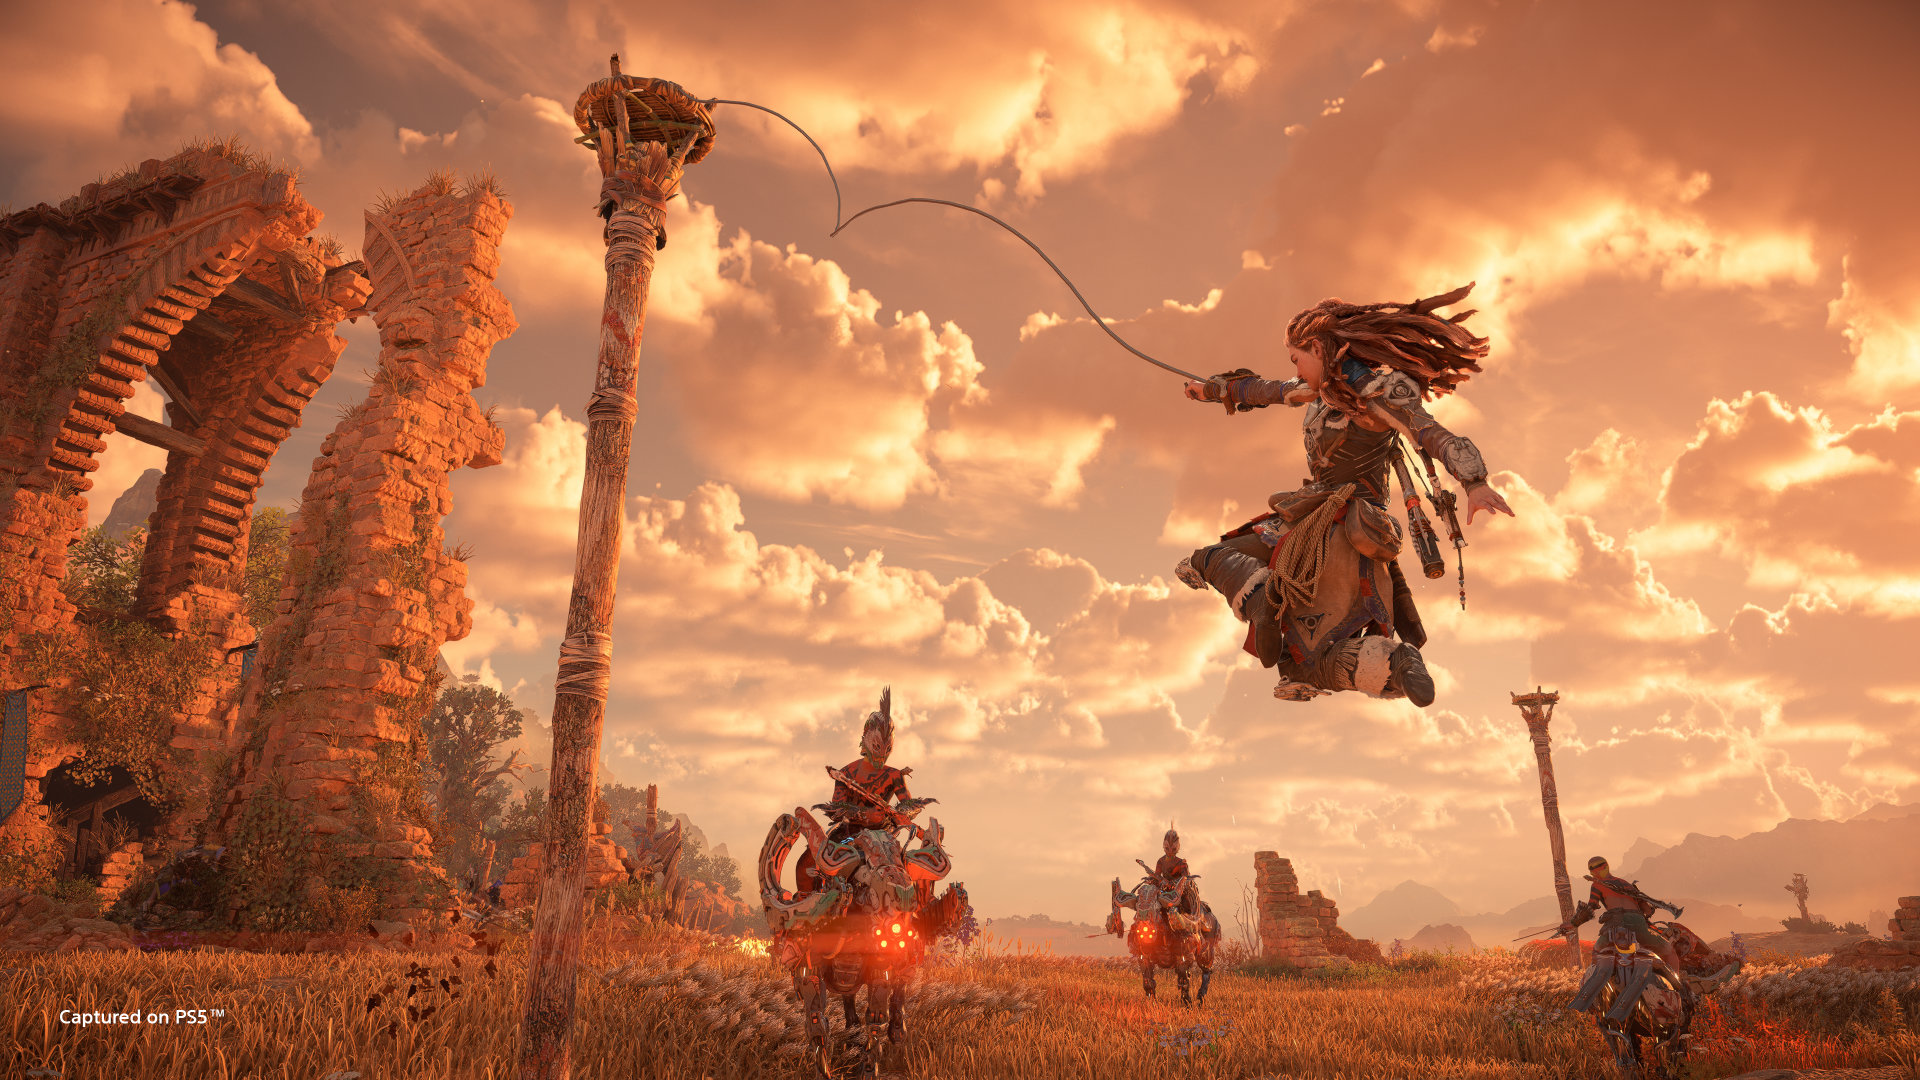 Horizon Forbidden West screenshot of Aloy using the Pullcaster to grapple to a post during combat.